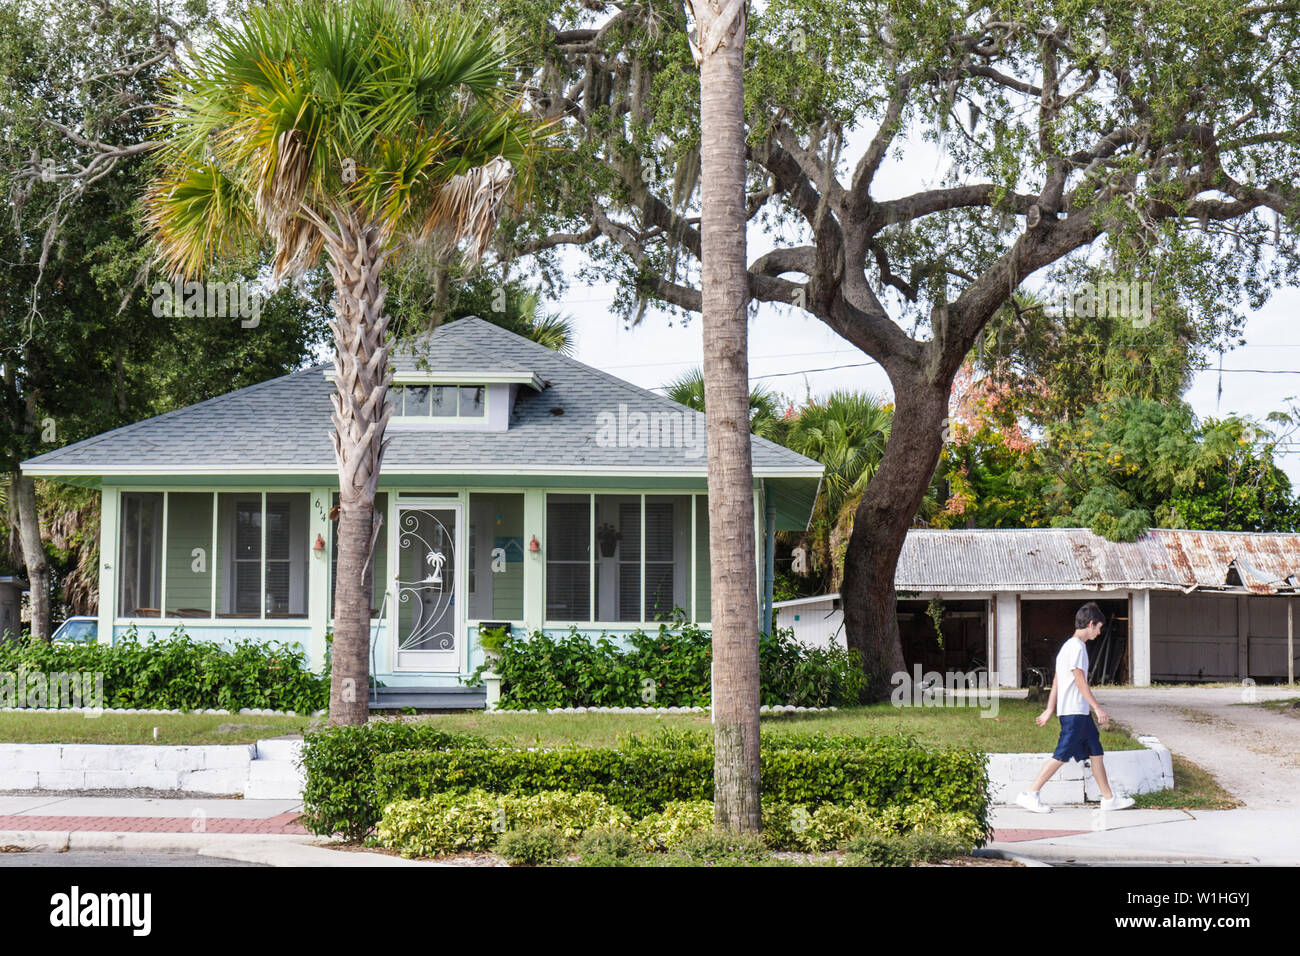 Melbourne Florida,historic Downtown,Main Street,revitalization,preservation,house houses home houses homes residence,housing,bungalow,facade,screened Stock Photo